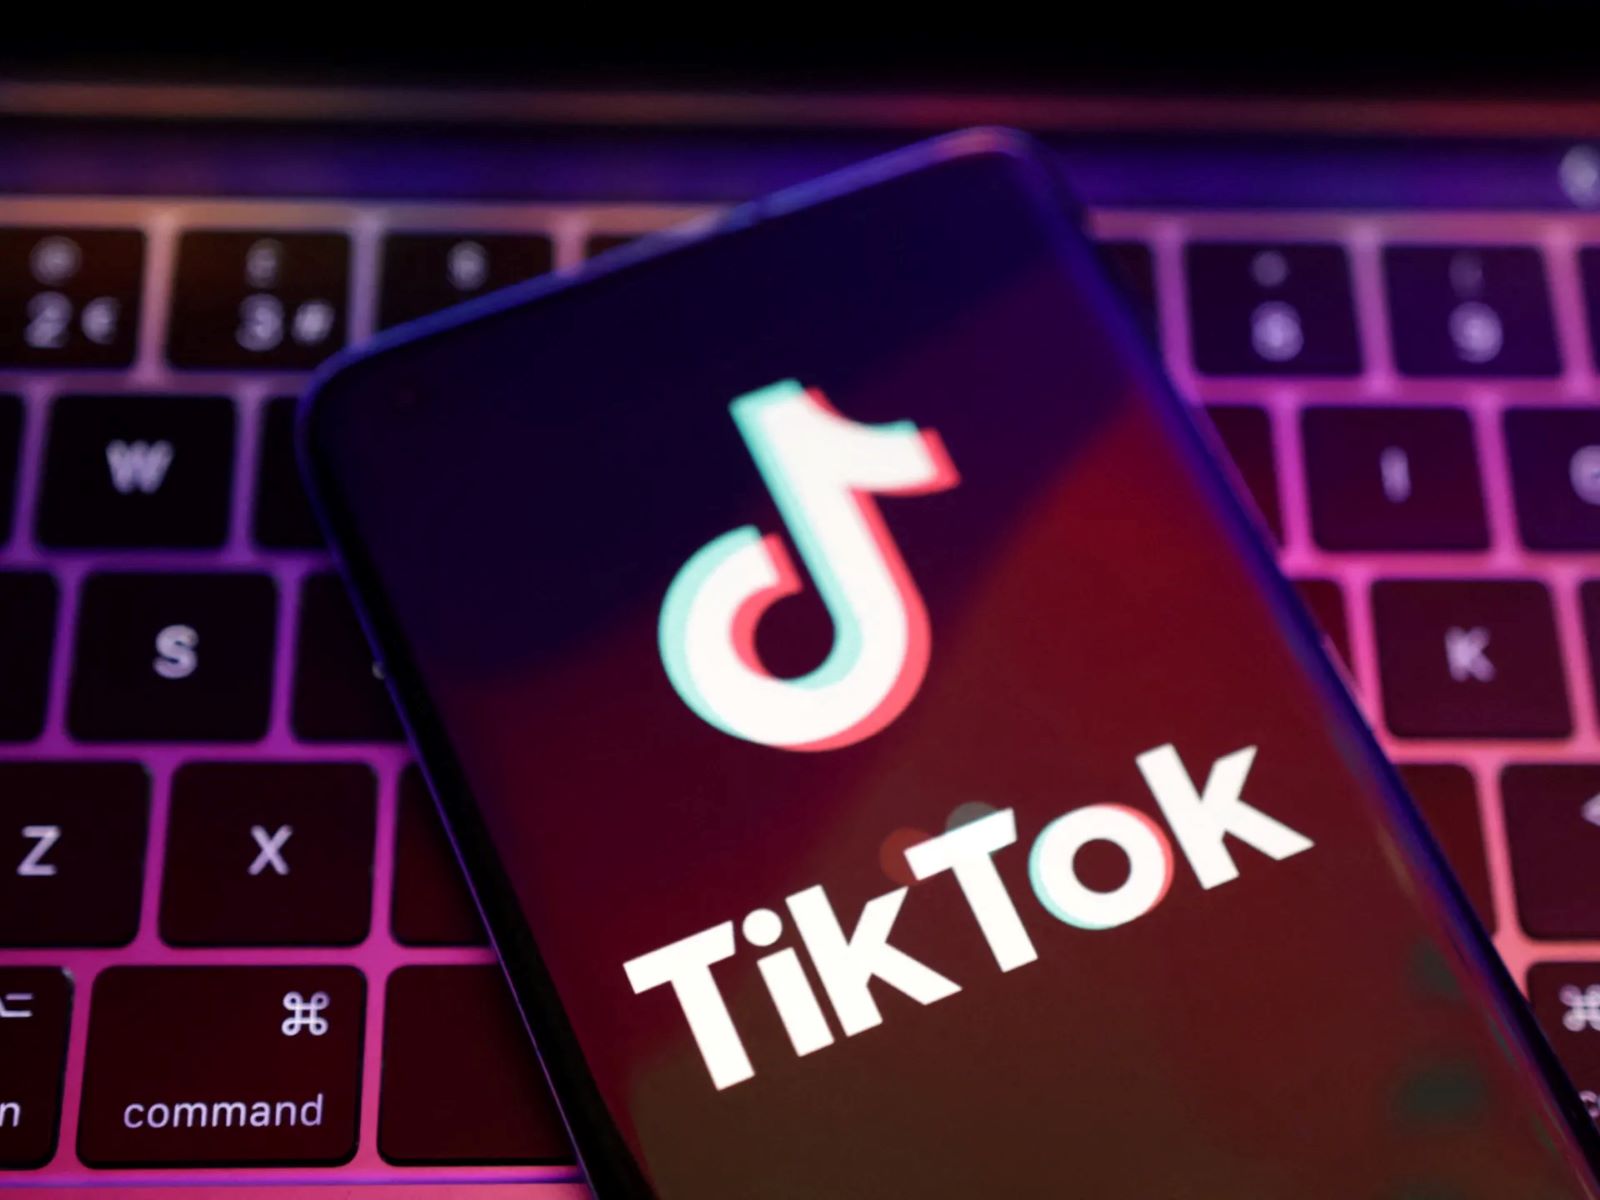 Discover The Secret To Finding Your TikTok URL In Just A Few Simple Steps!